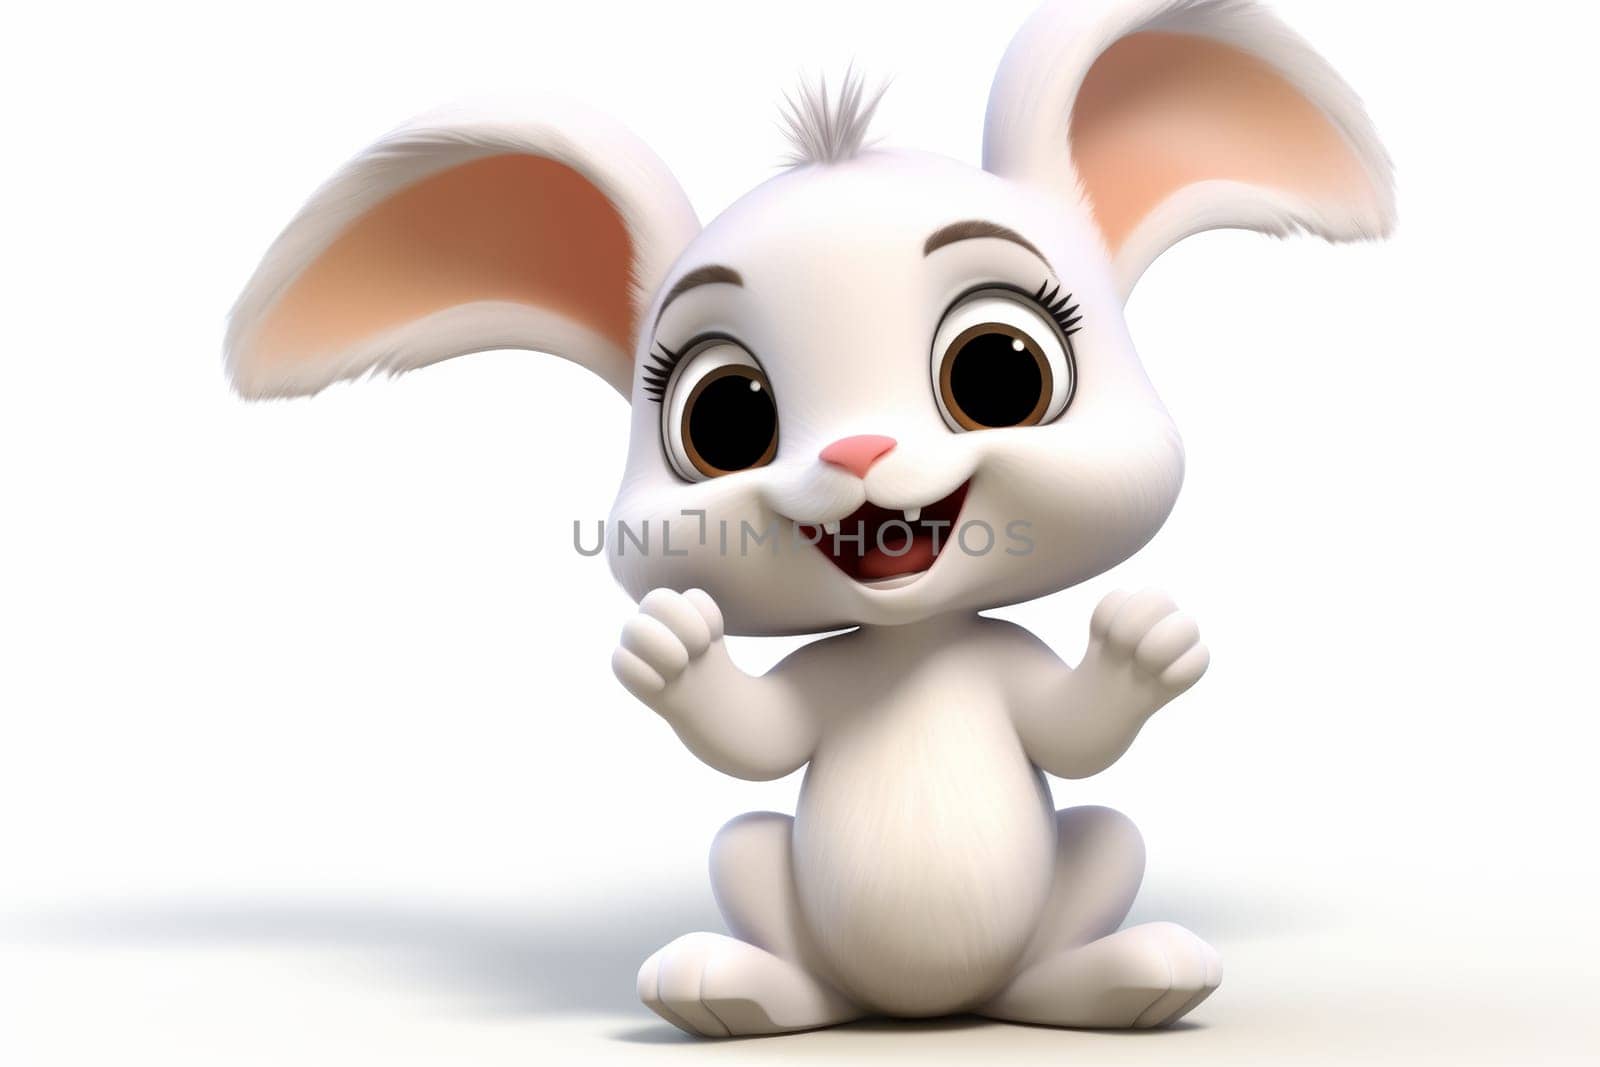 Cute cartoon white rabbit isolated on a white background. 3d illustration.